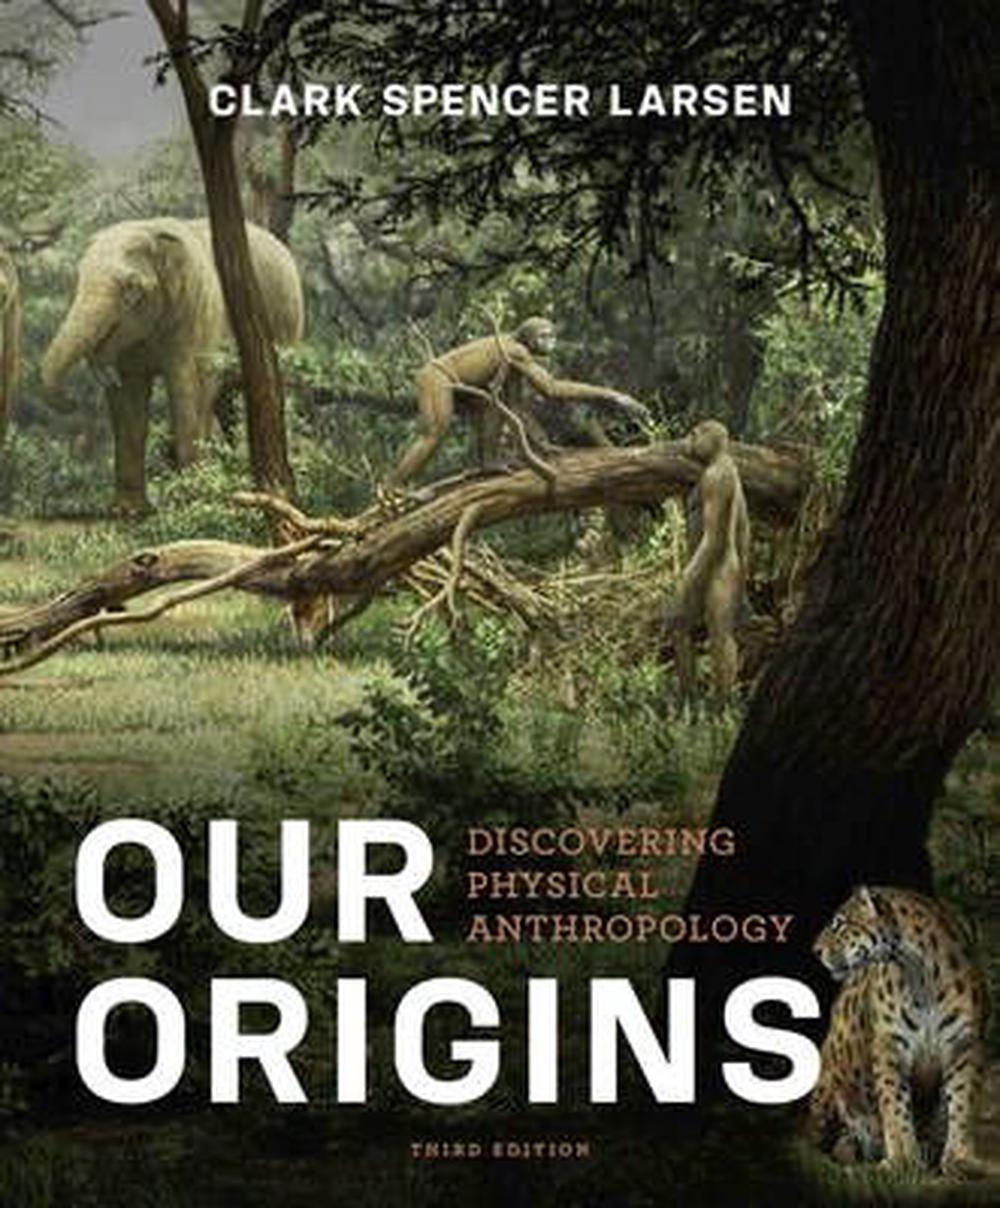 Our Origins Discovering Physical Anthropology, Third Edition by Larsen, Paperback, 9780393921434